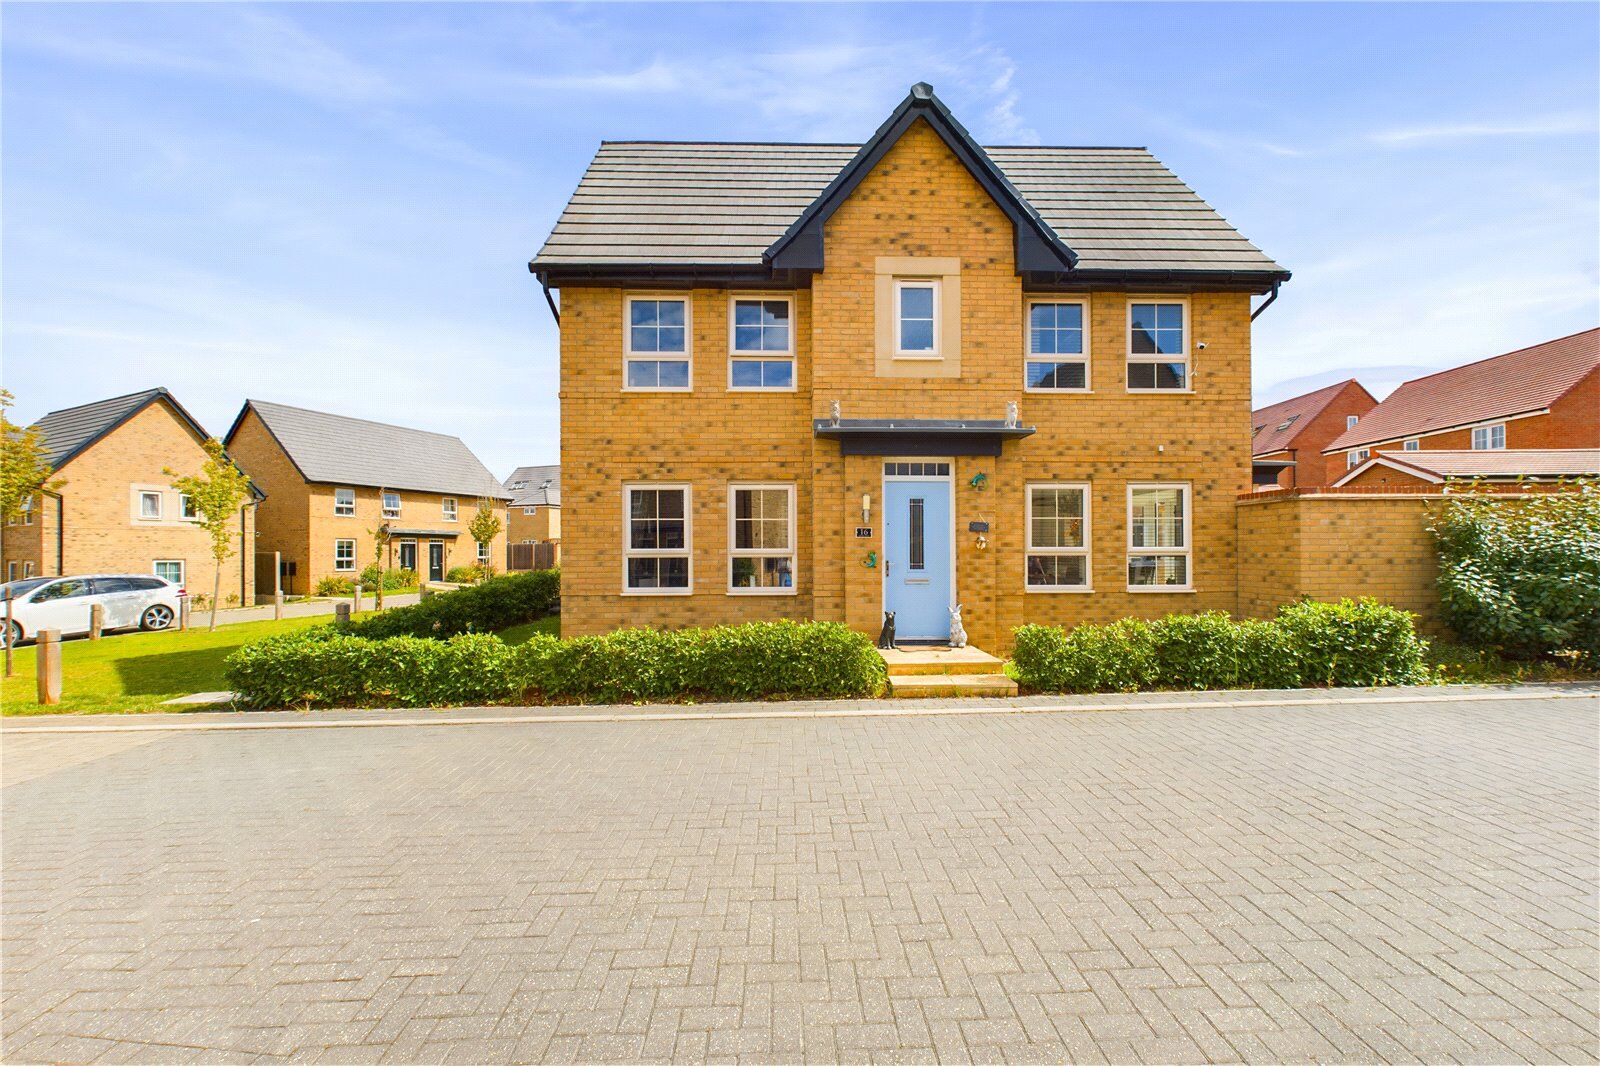 3 bedroom detached house for sale Tanner Drive, Godmanchester, PE29, main image